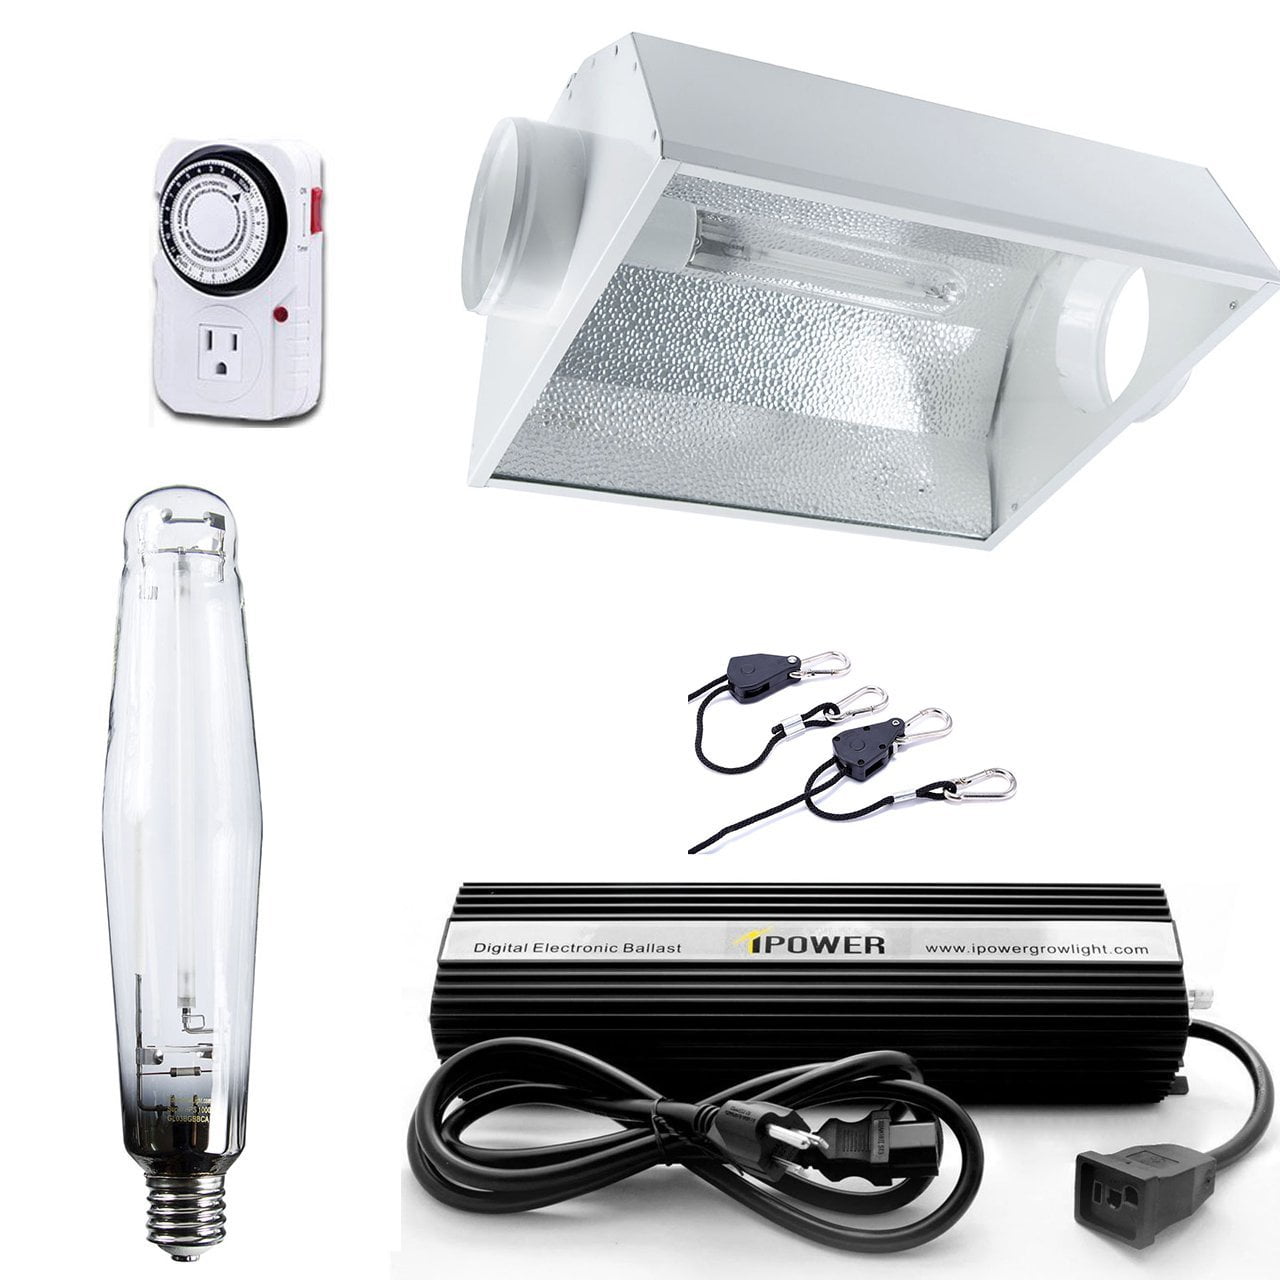 HPS 600w Dimmable Digital Ballast with Wing reflector hydroponics lamp light com 